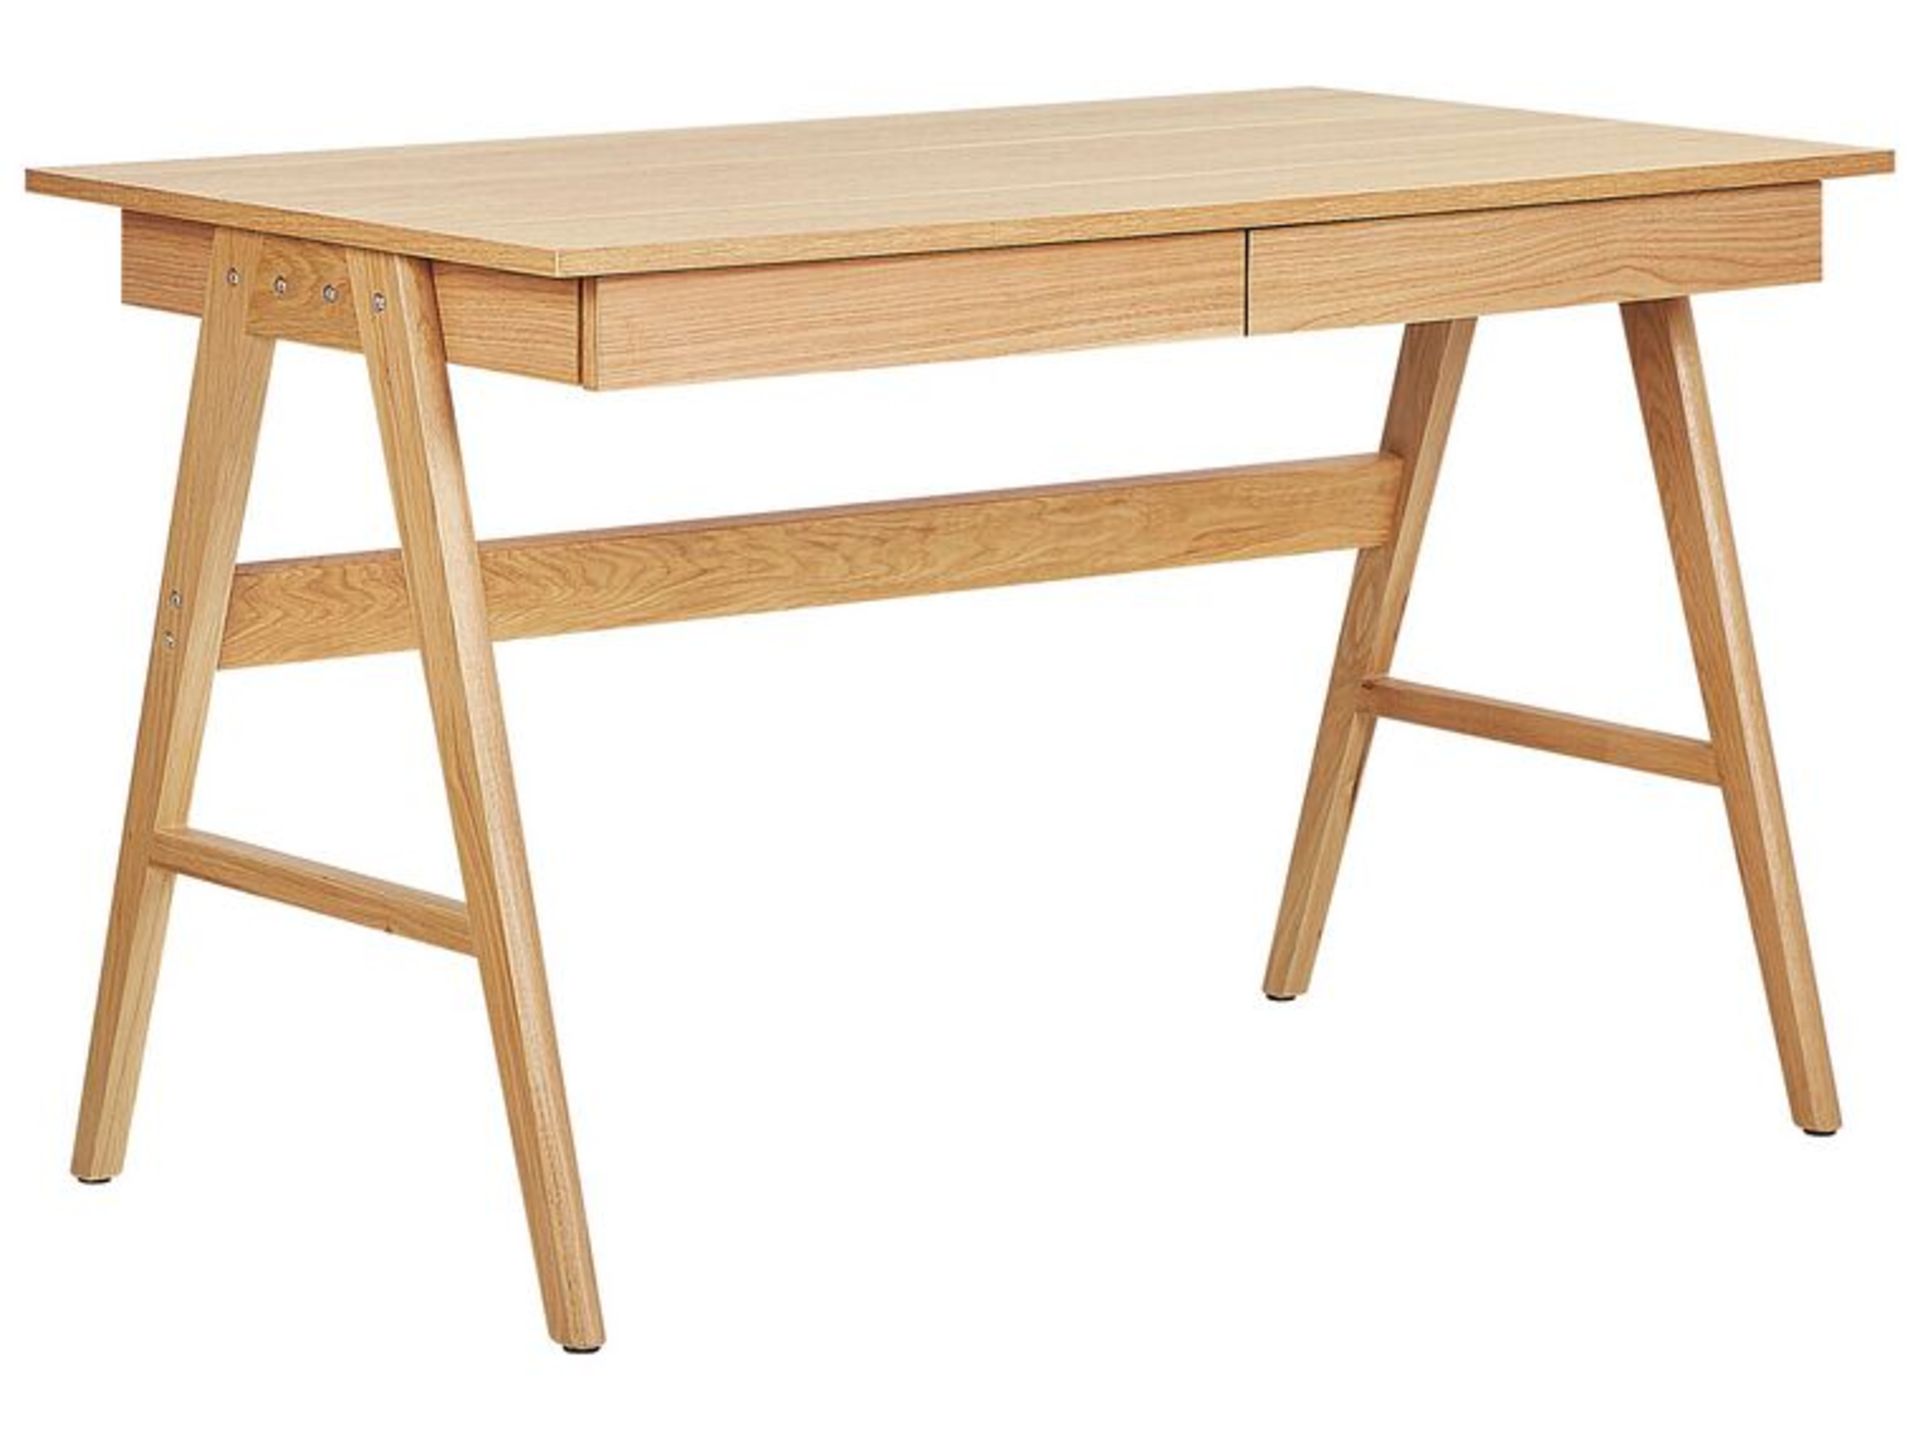 Sheslay 2 Drawer Home Office Desk 120 x 70 cm Light Wood. - R13a.9. RRP £579.99. A stylish yet